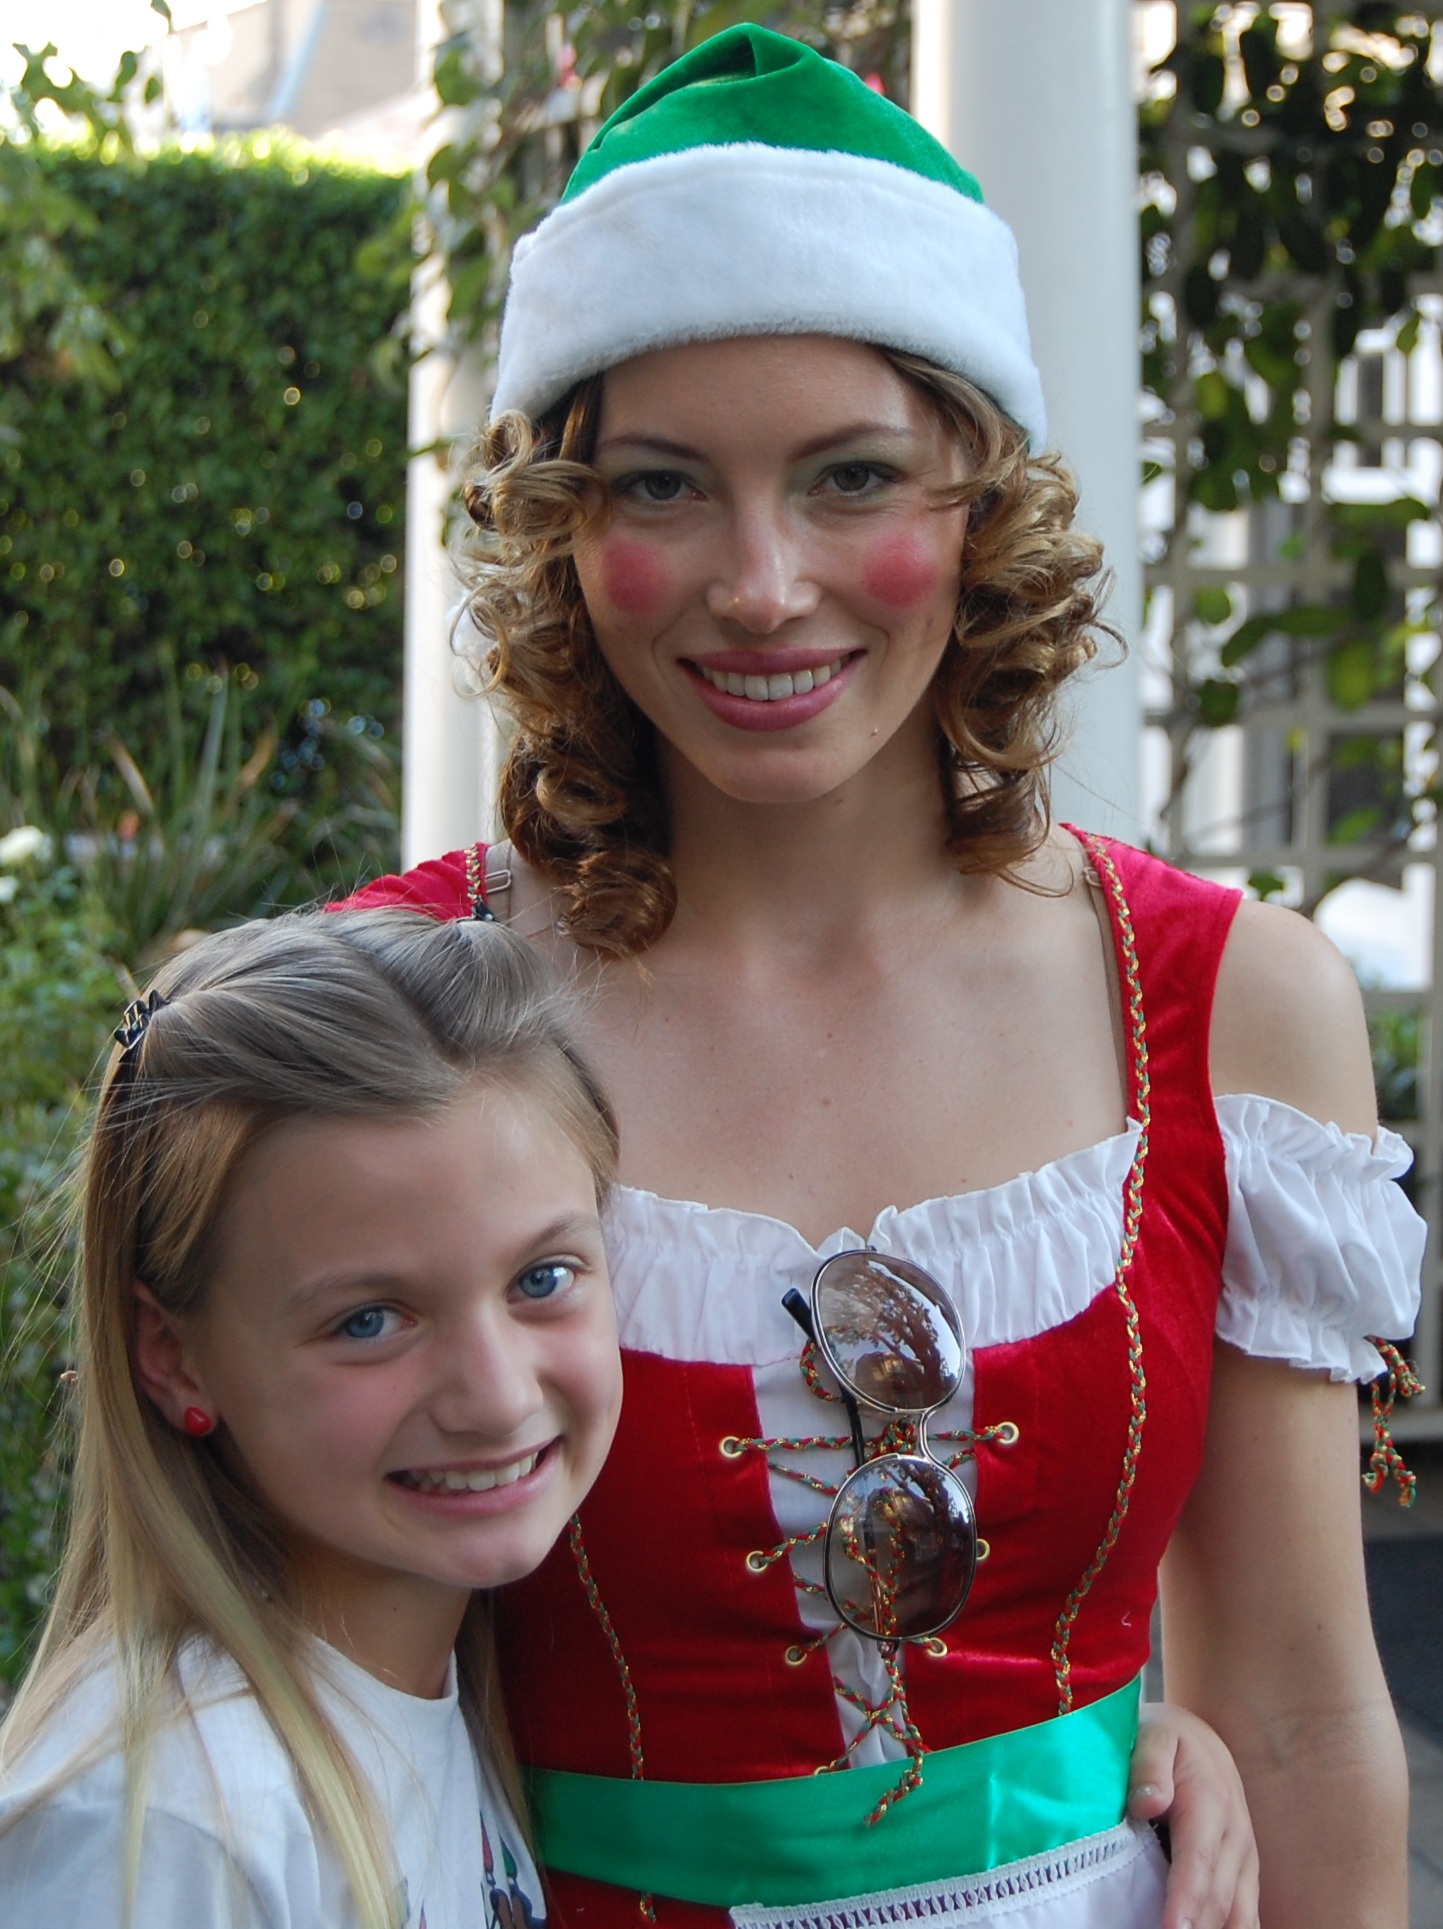 Laci Kay with Jessica Biel behind the scenes of Funny or Die Productions!